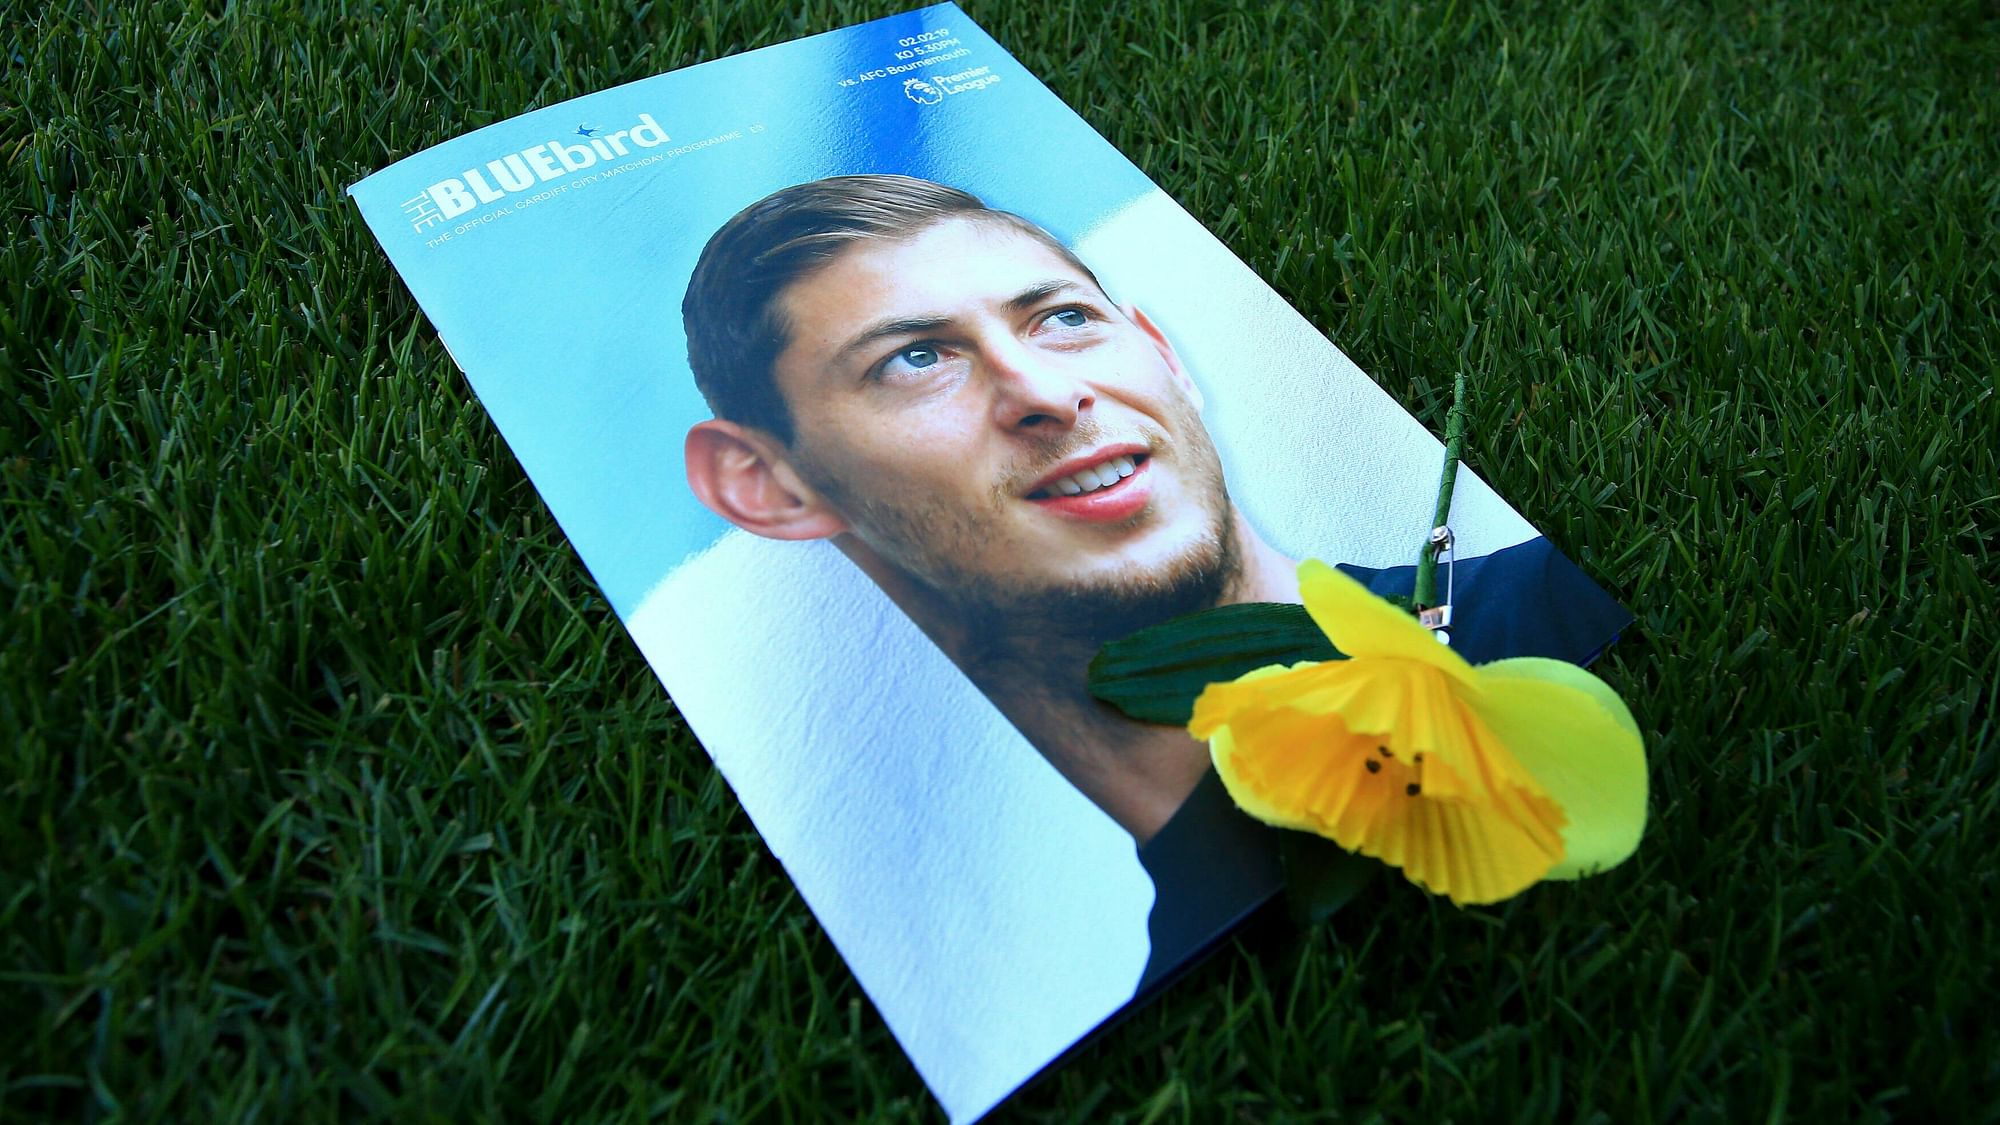 Police confirmed that the body recovered from the wreckage was the Argentine soccer player Emiliano Sala.